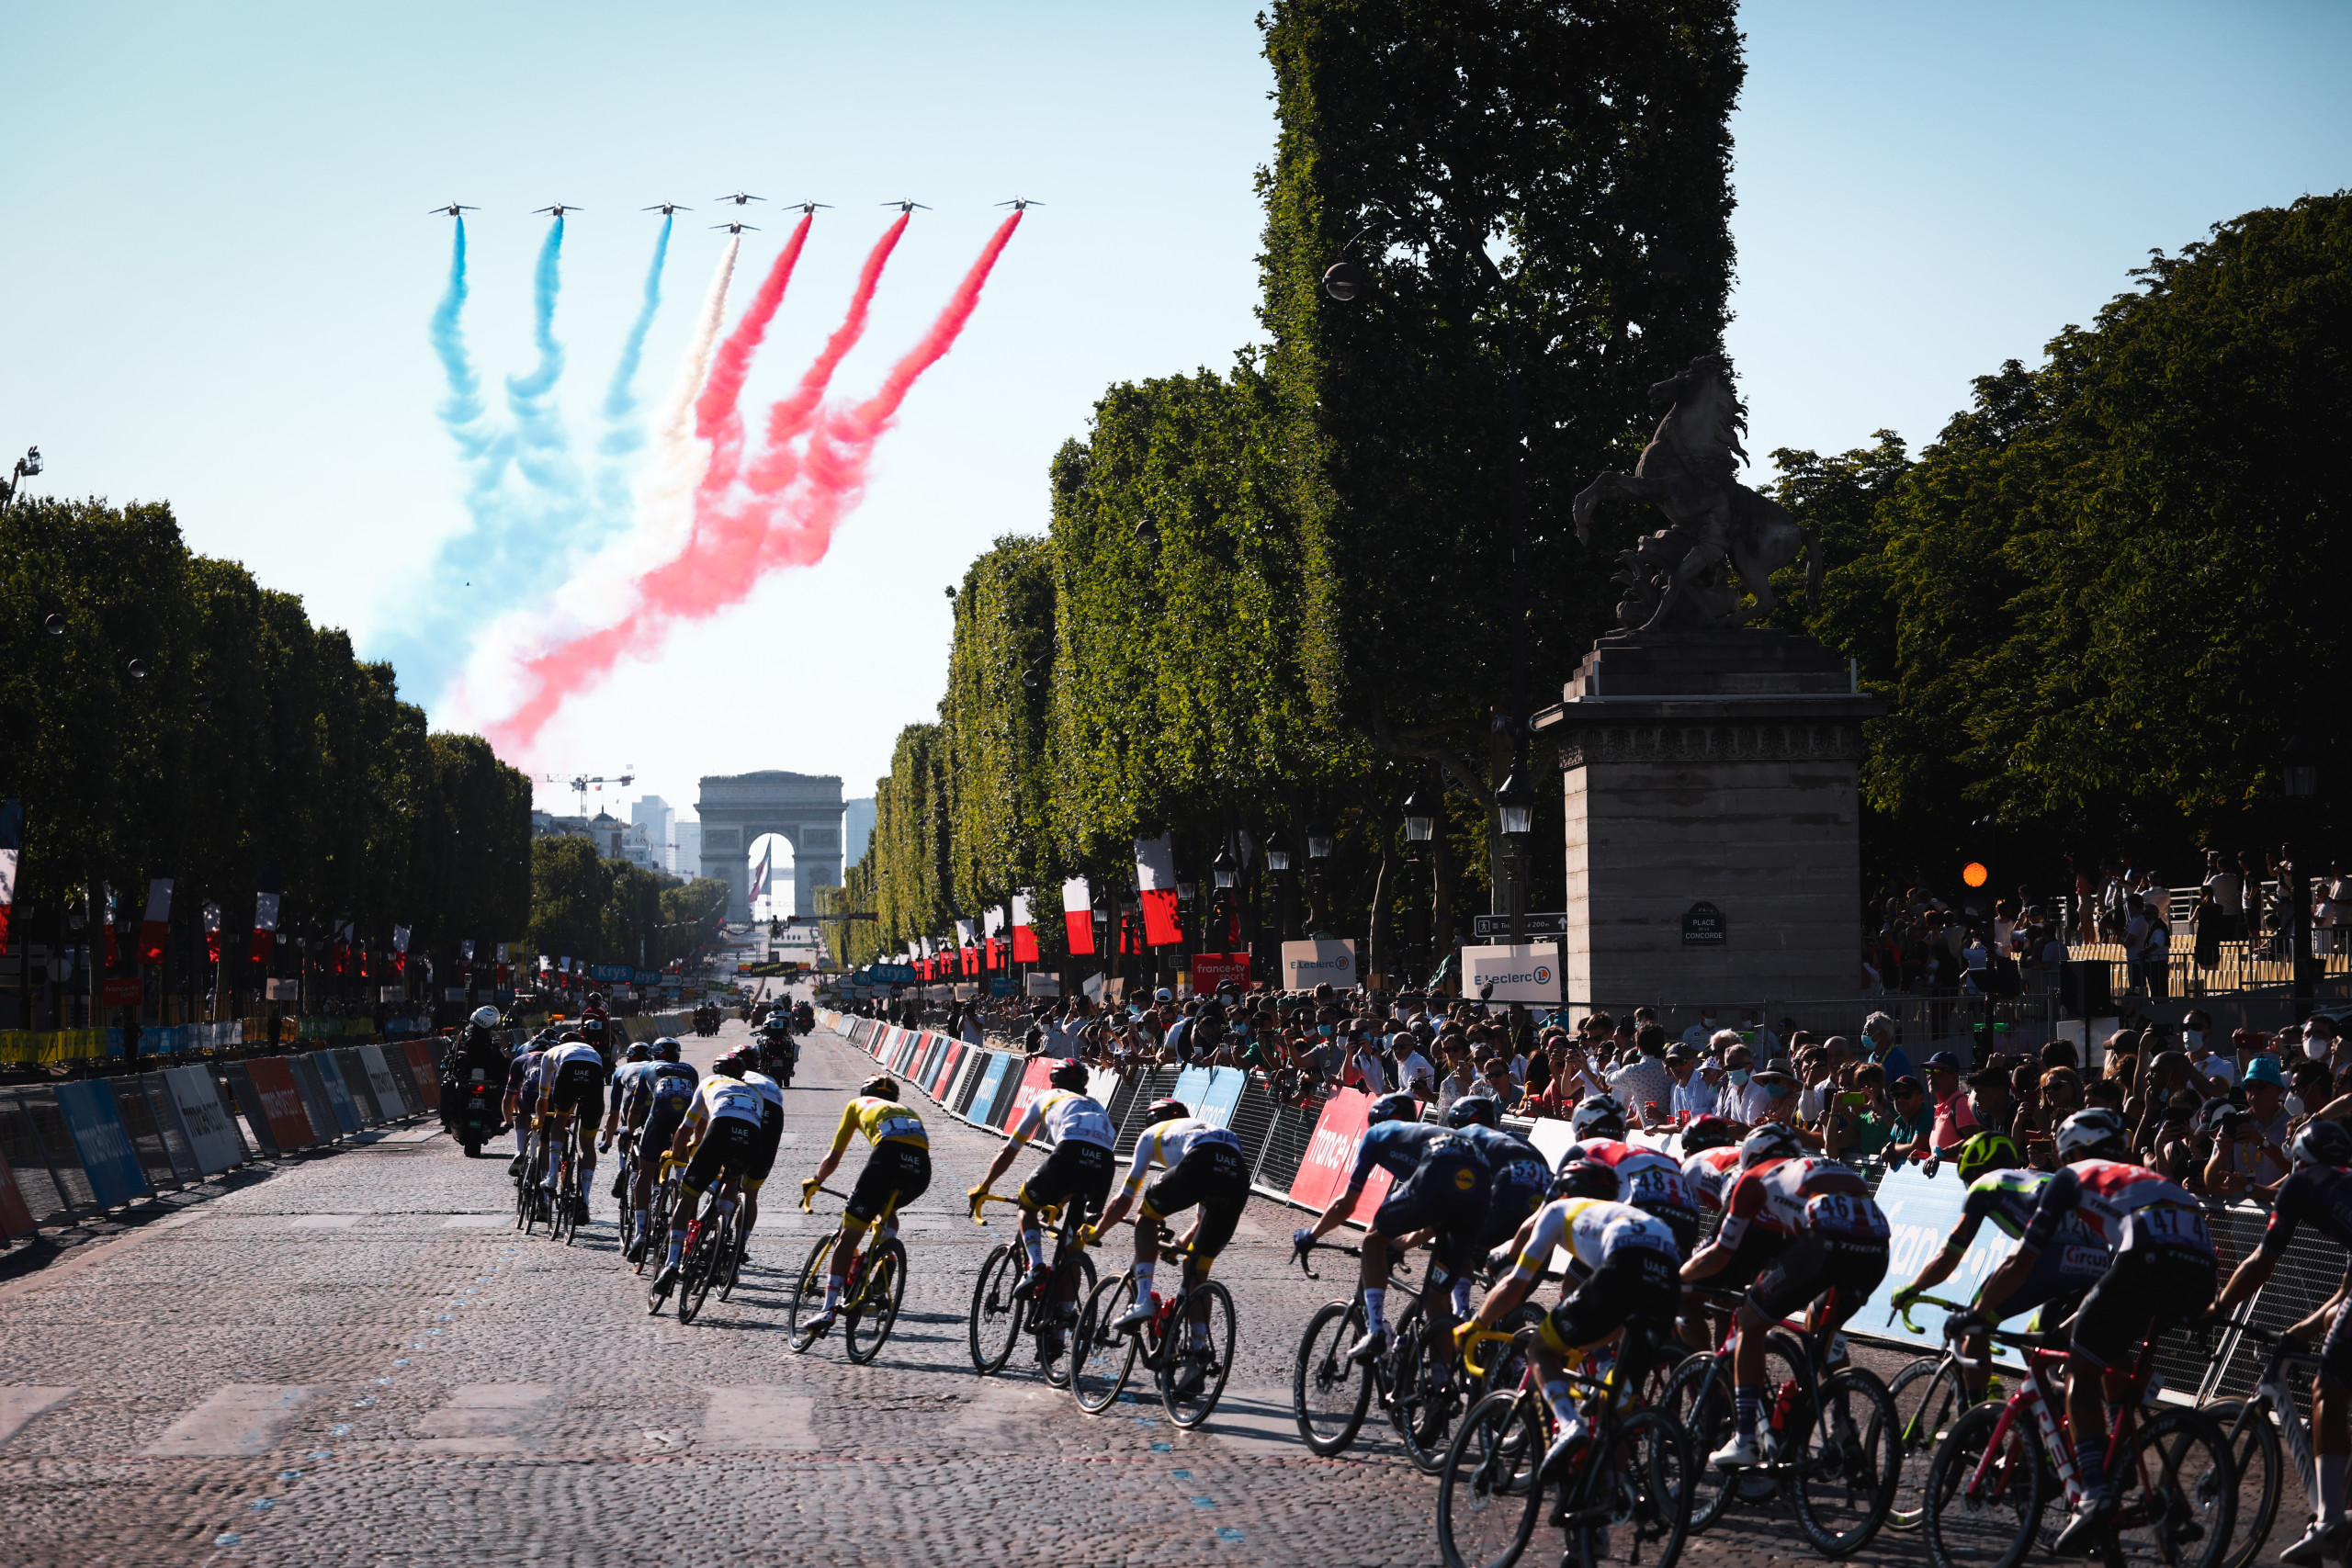 Netflix and A.S.O., in partnership with France Televisions, announce a docuseries on the Tour de France 2022